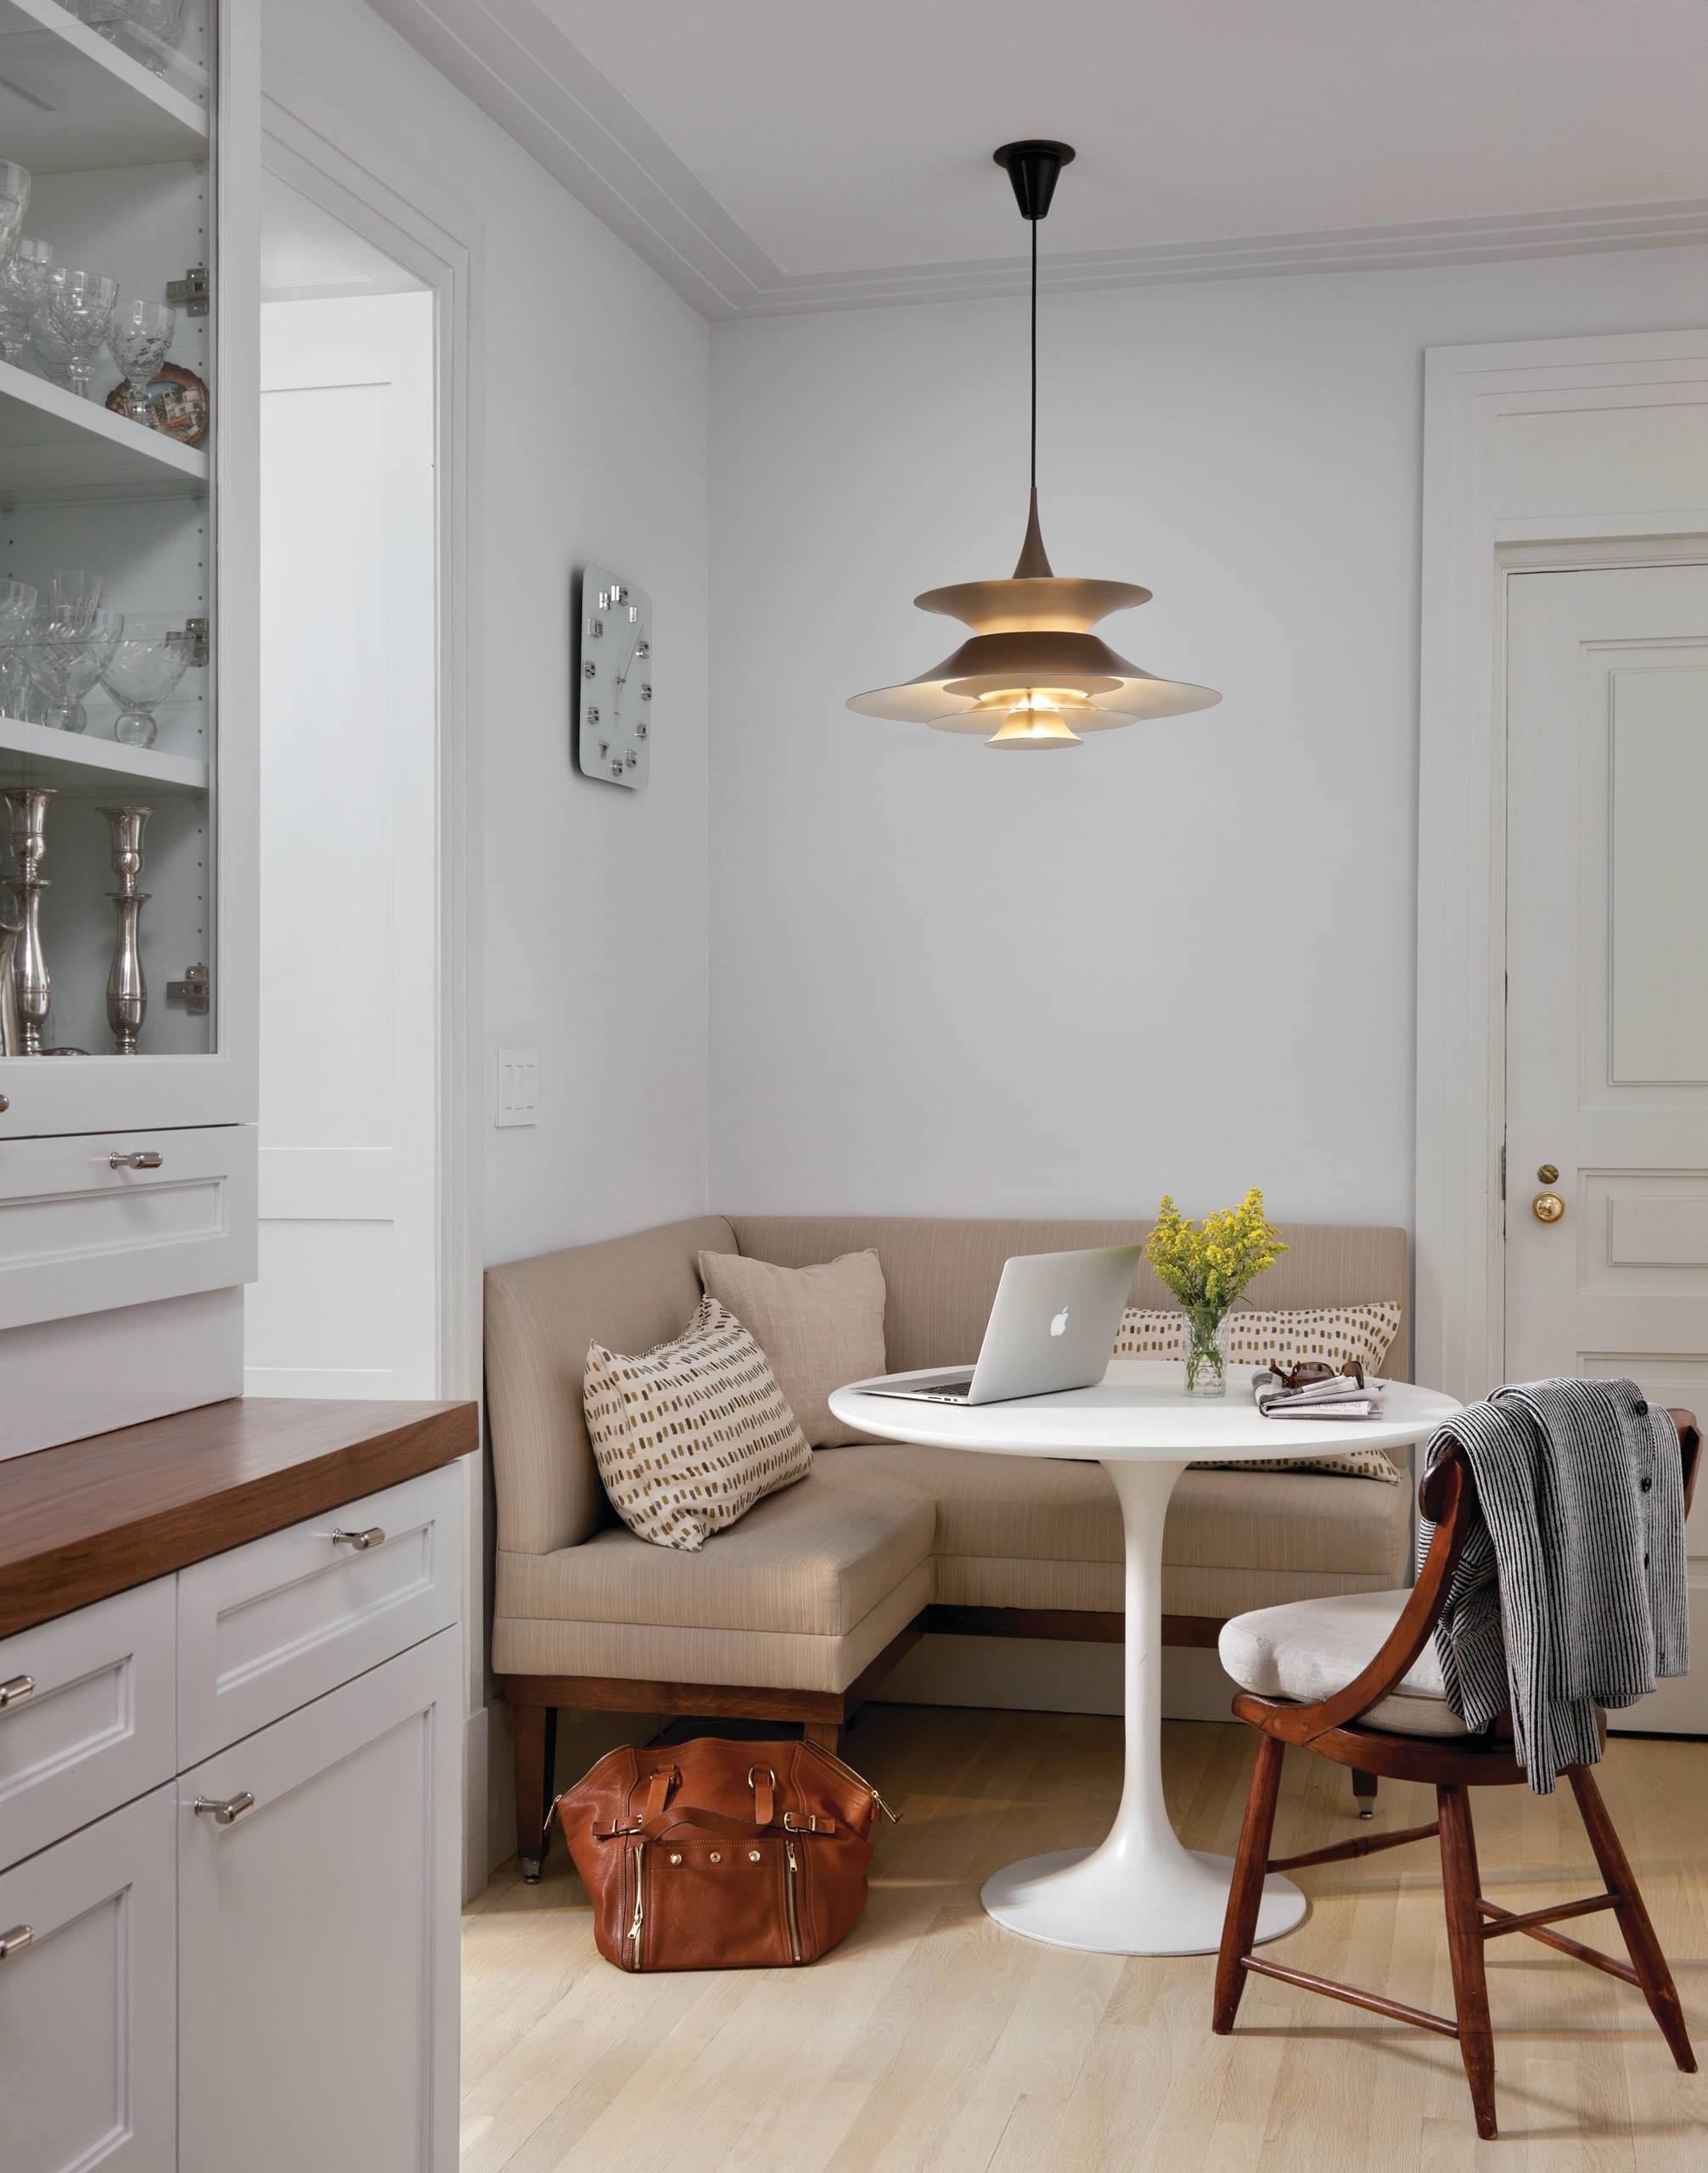 12 Ways to Make a Dining Table Work in a Small Space | Houzz UK